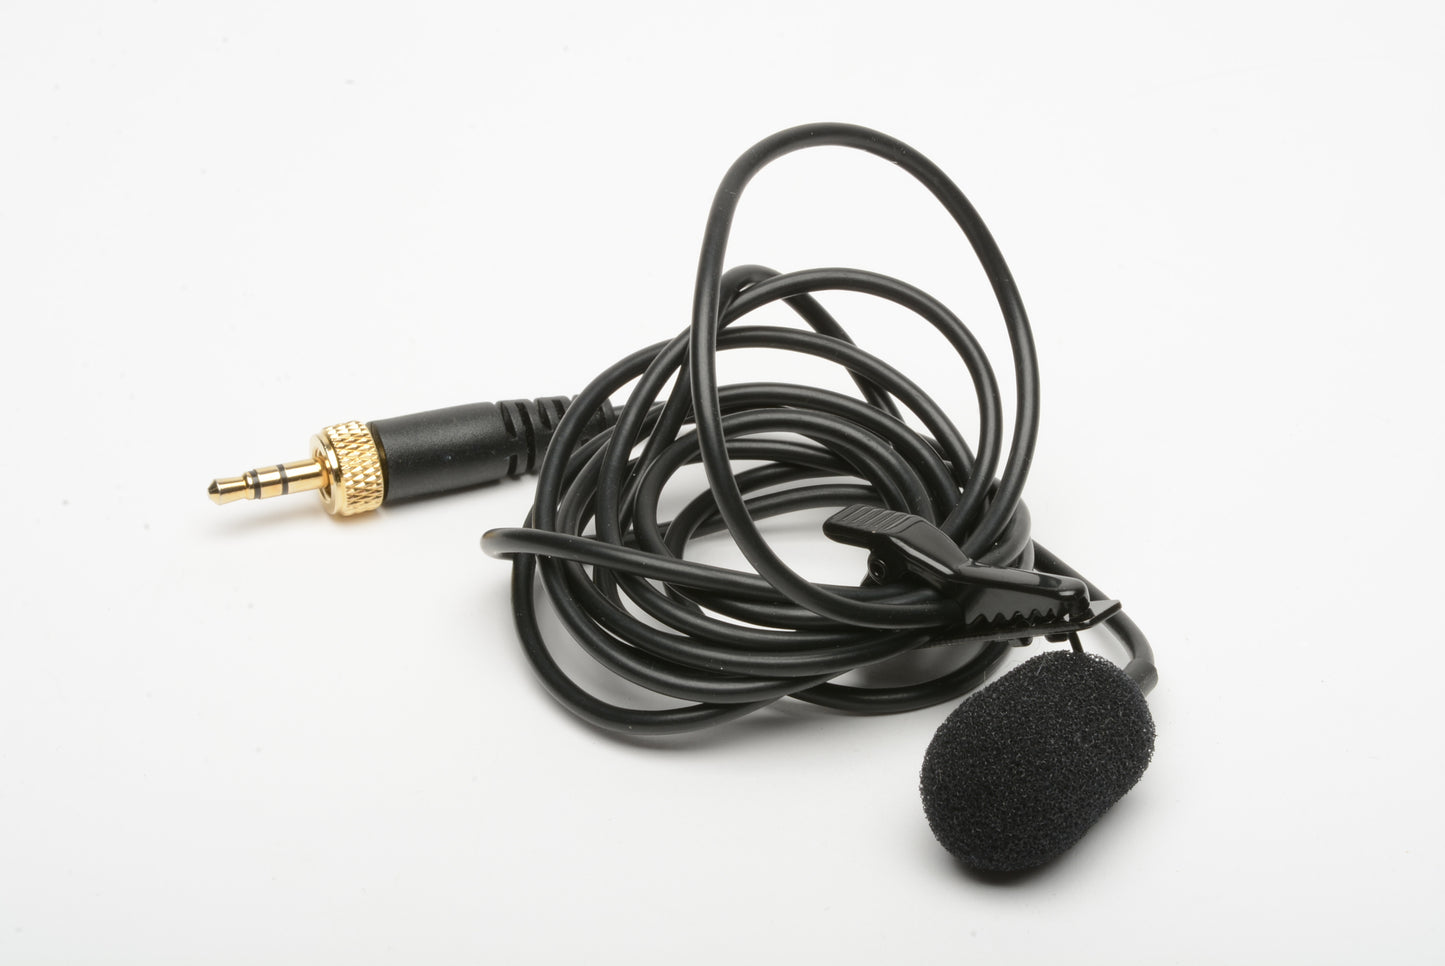 Lavalier Lapel Mic, nice quality, works great